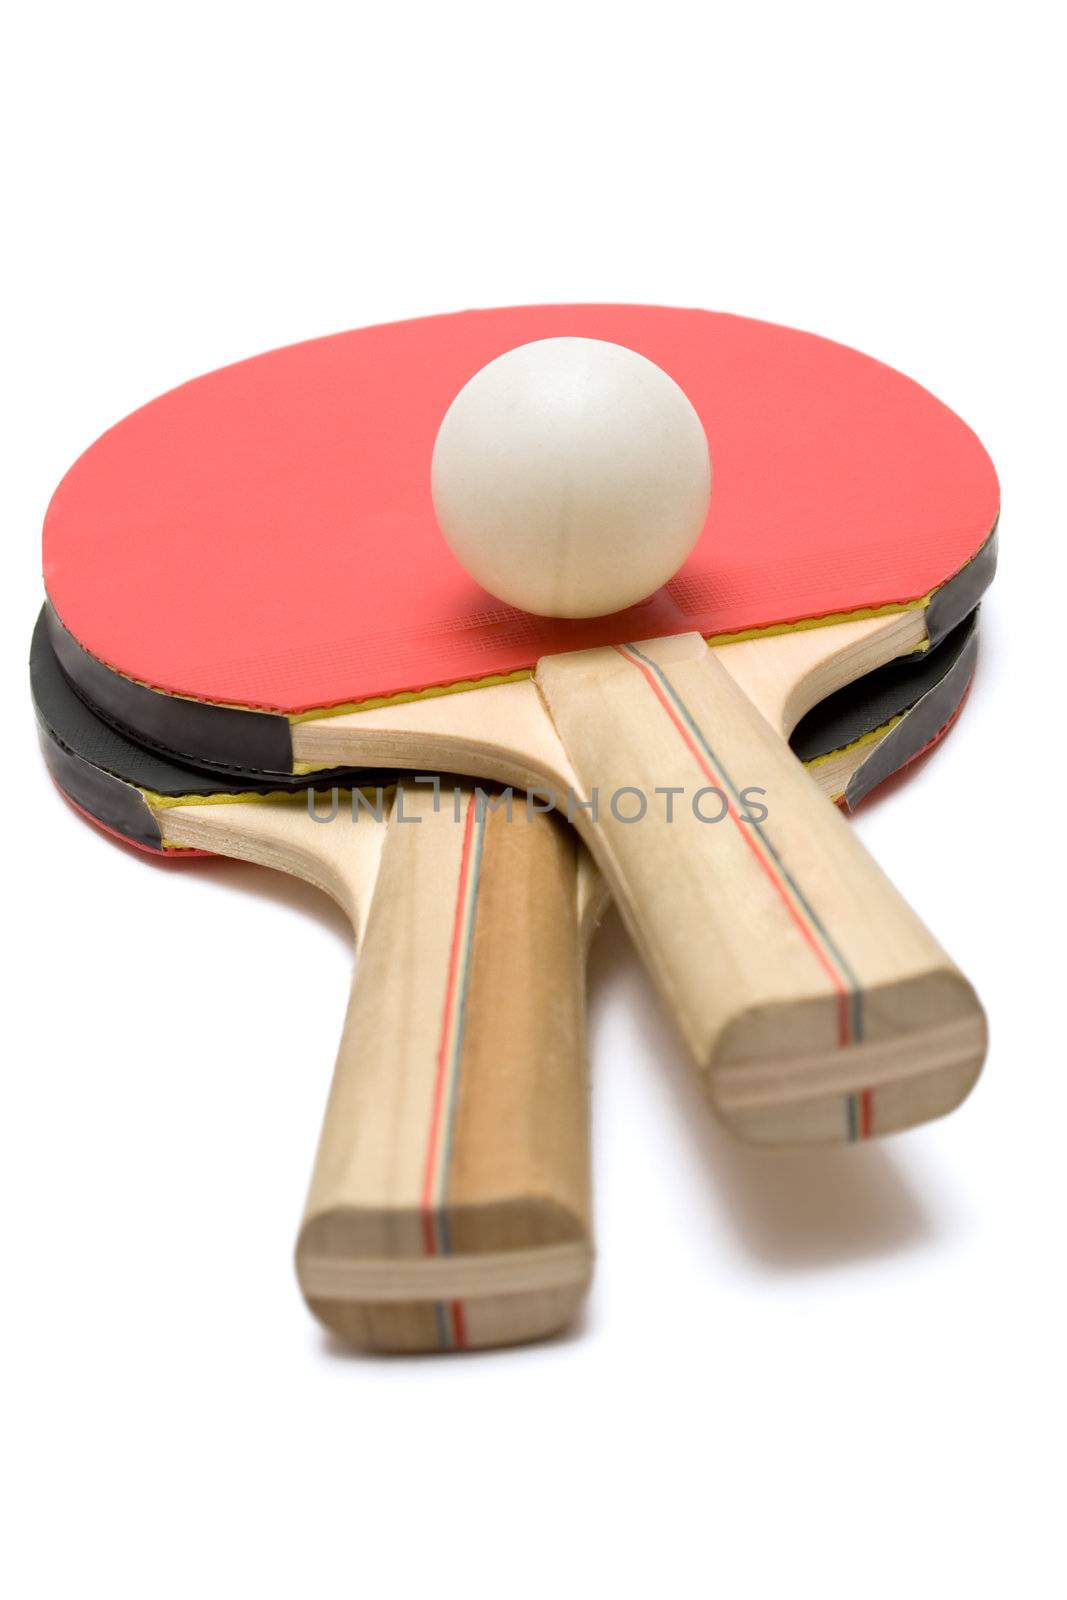 Red and black ping pong paddles with ball isolated on a white background.